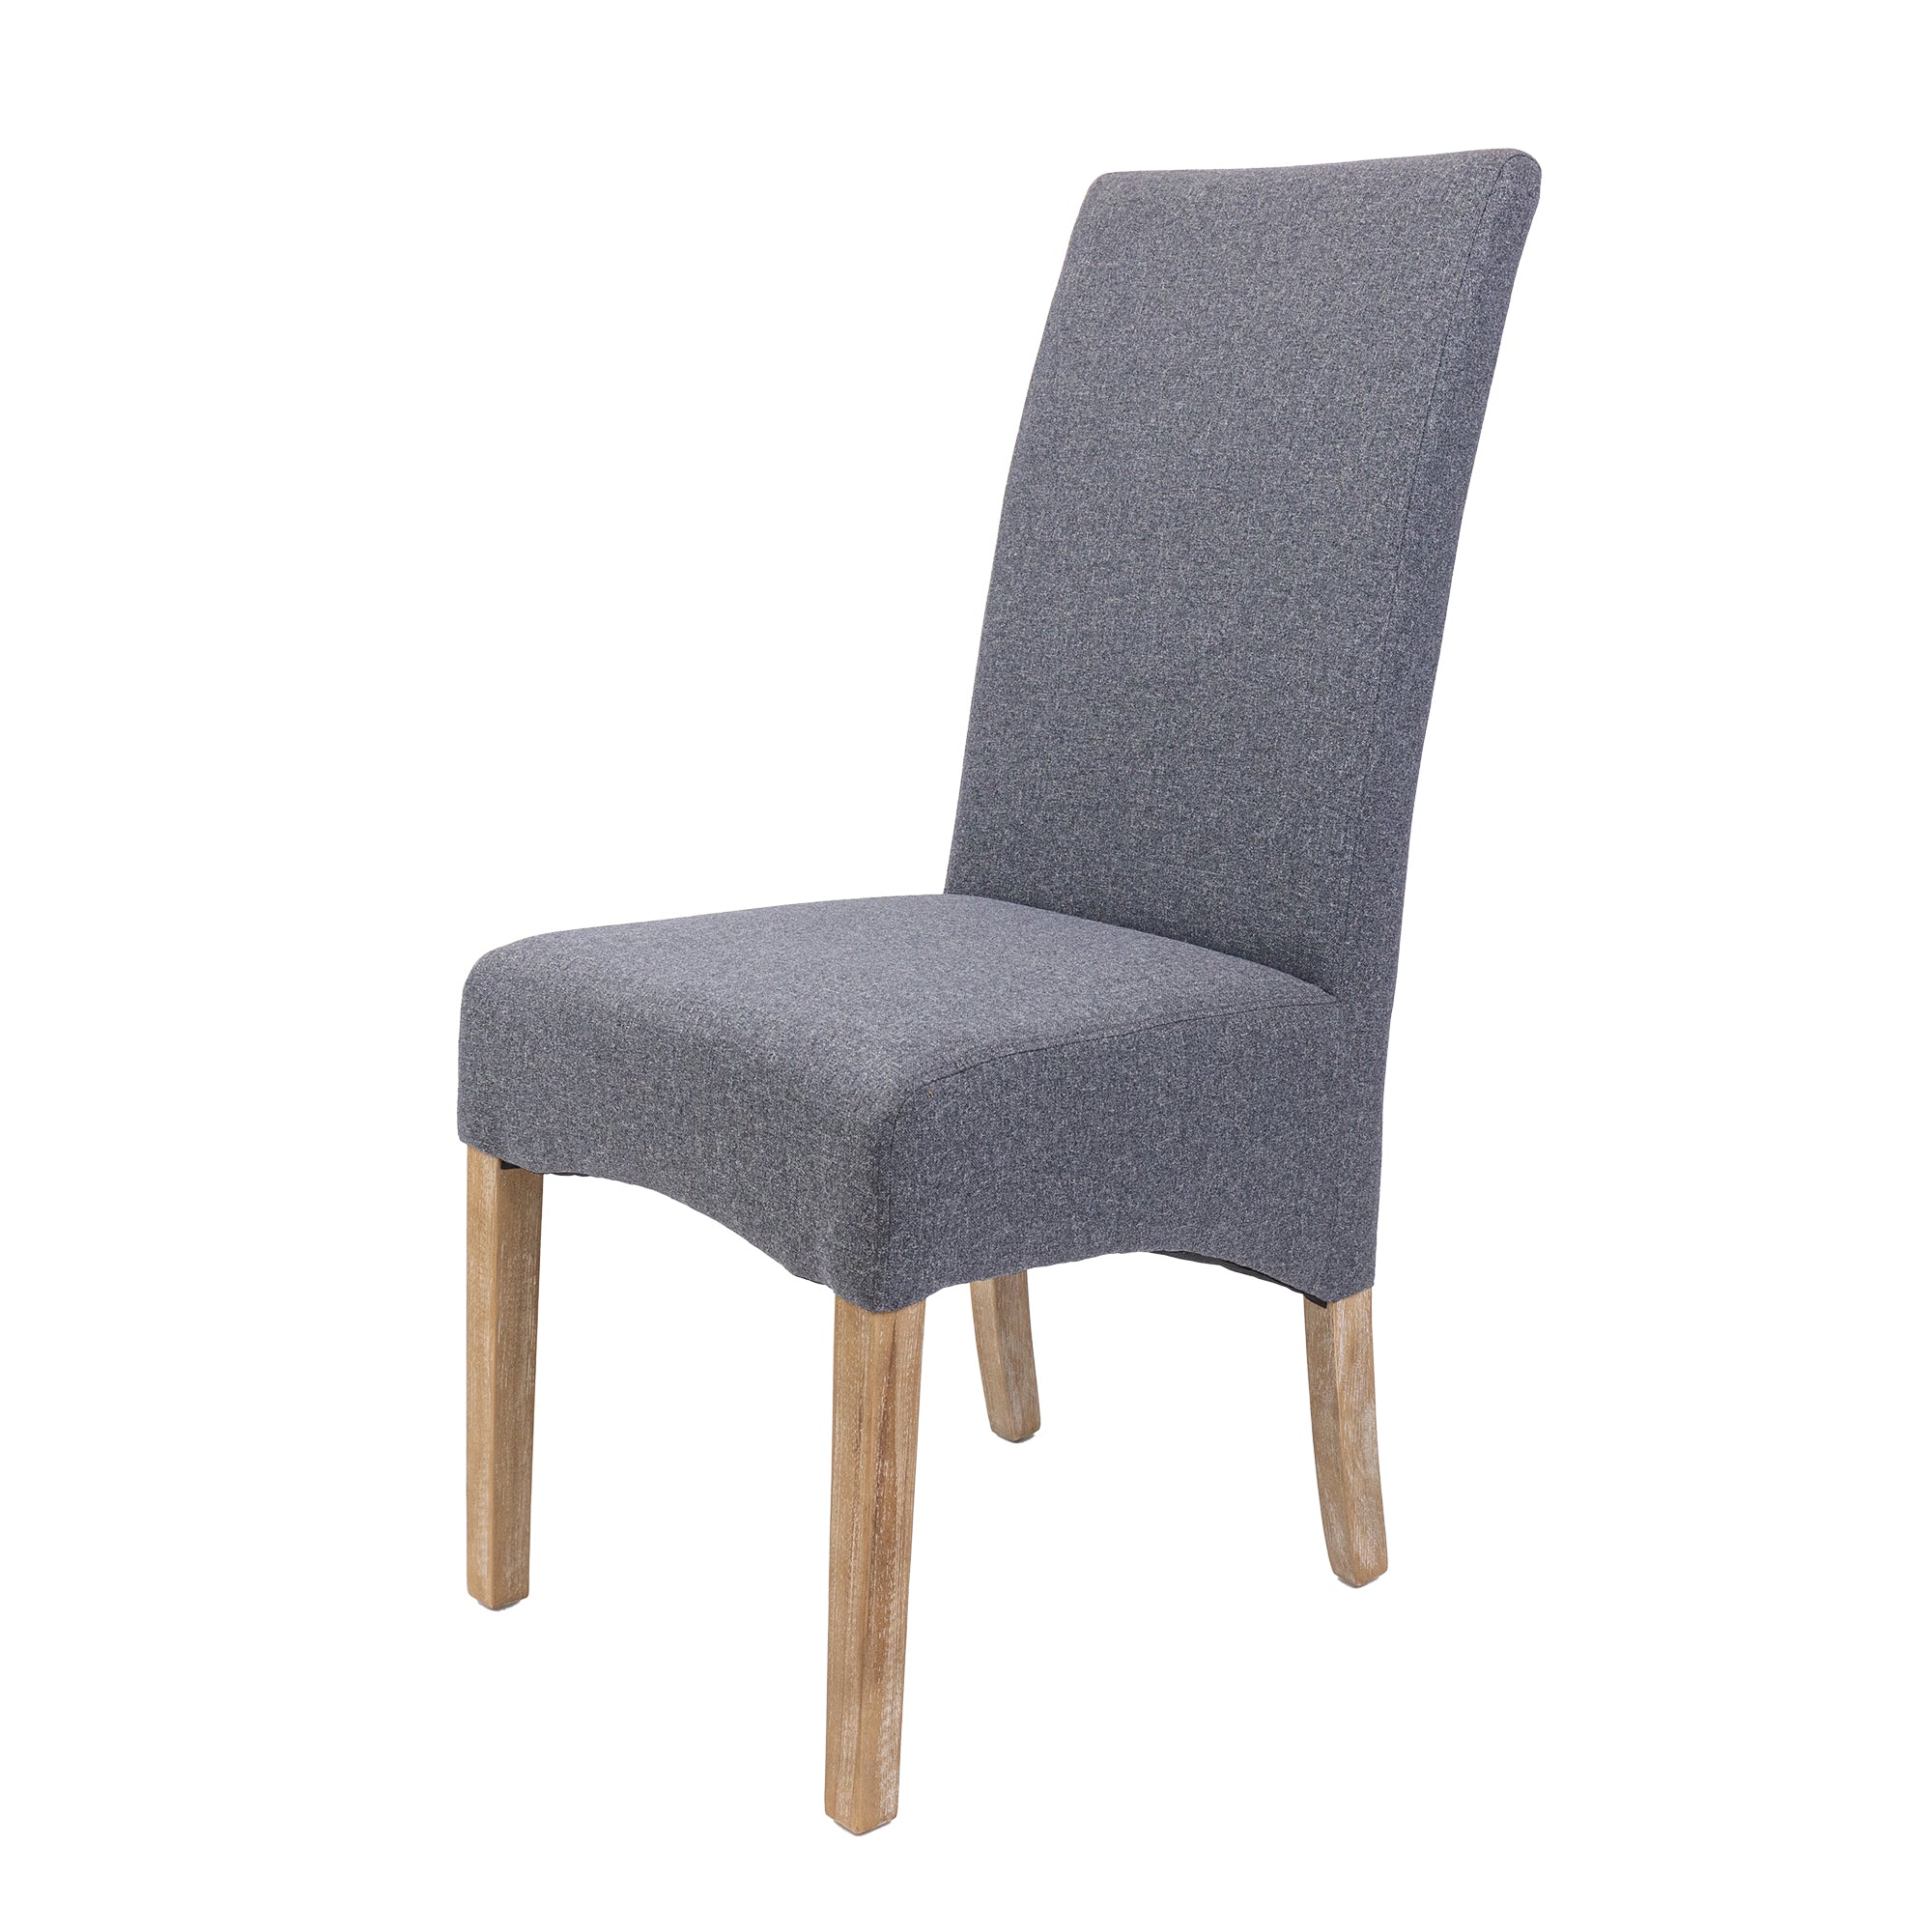 Grey Upholstered Dining Chairs with Pine Frame, Set of 2